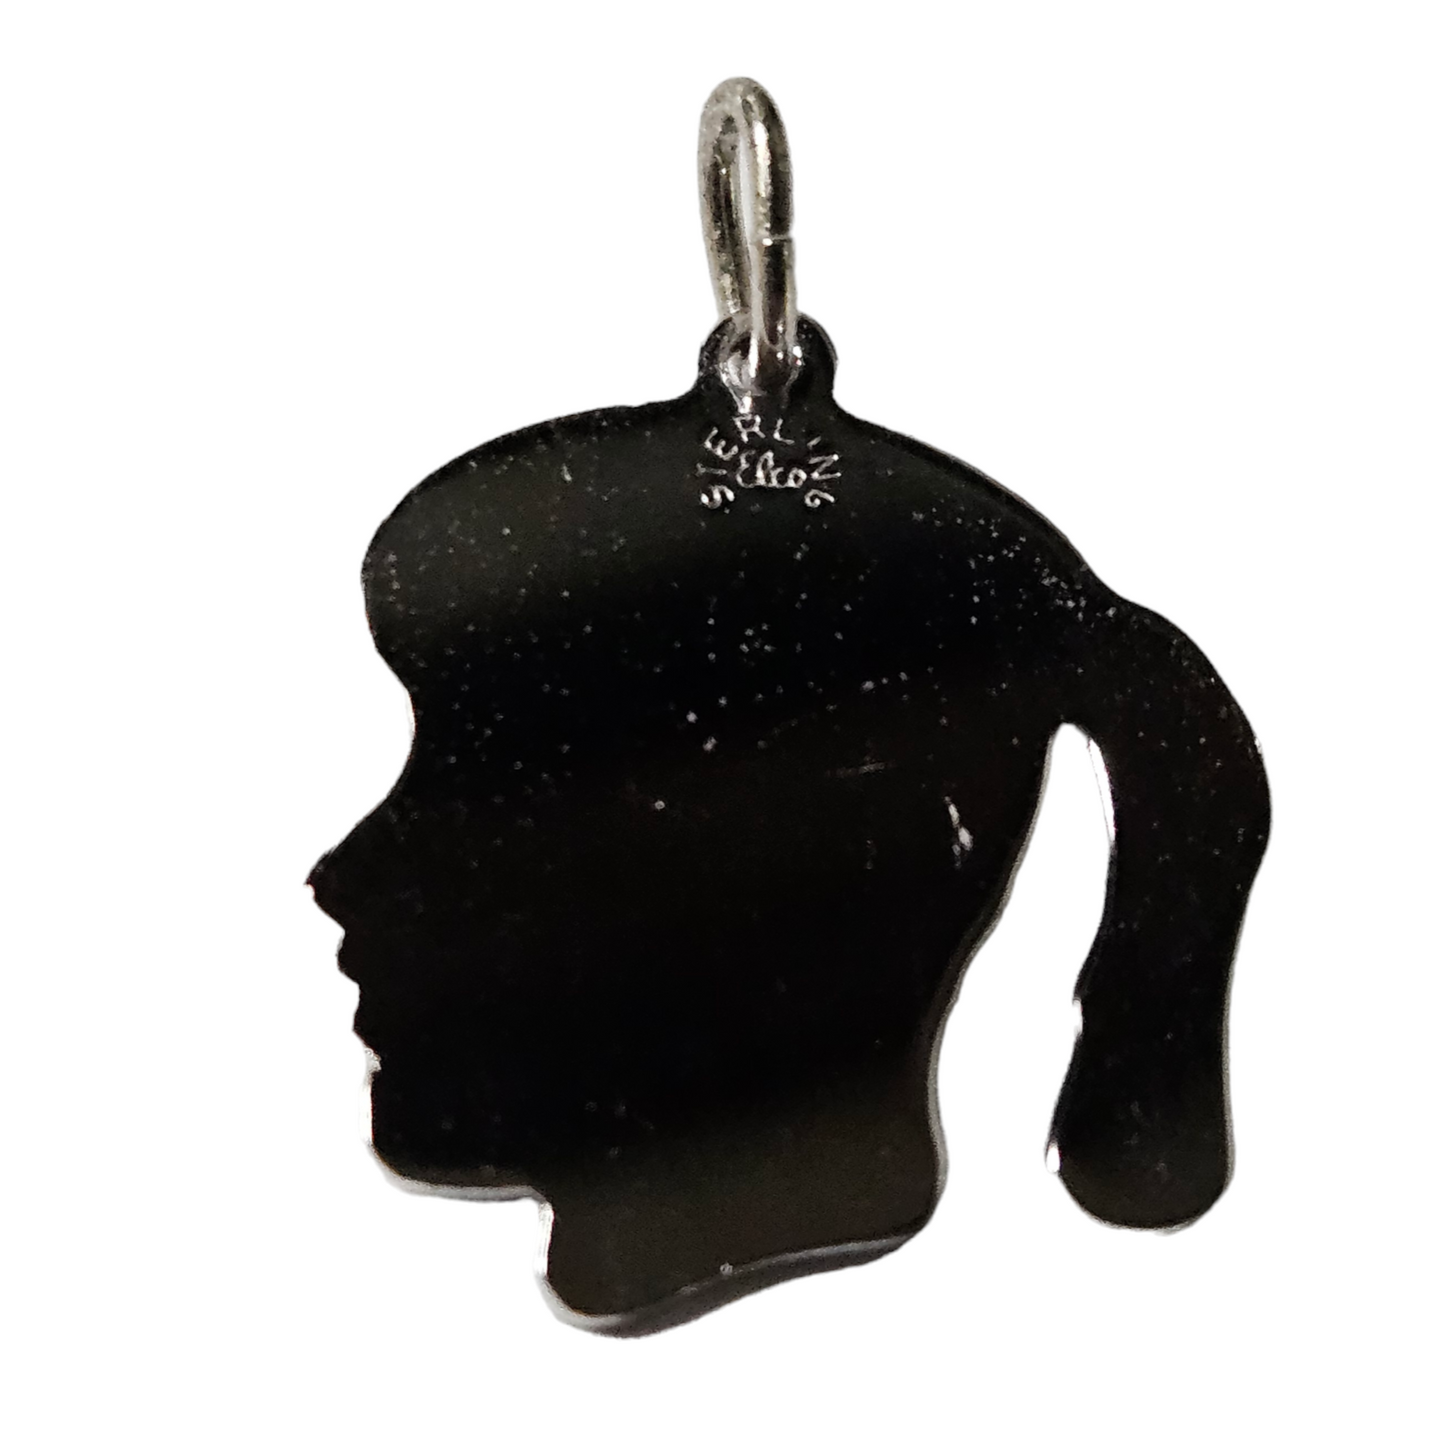 Girls Head with Ponytail Charm (flaws)